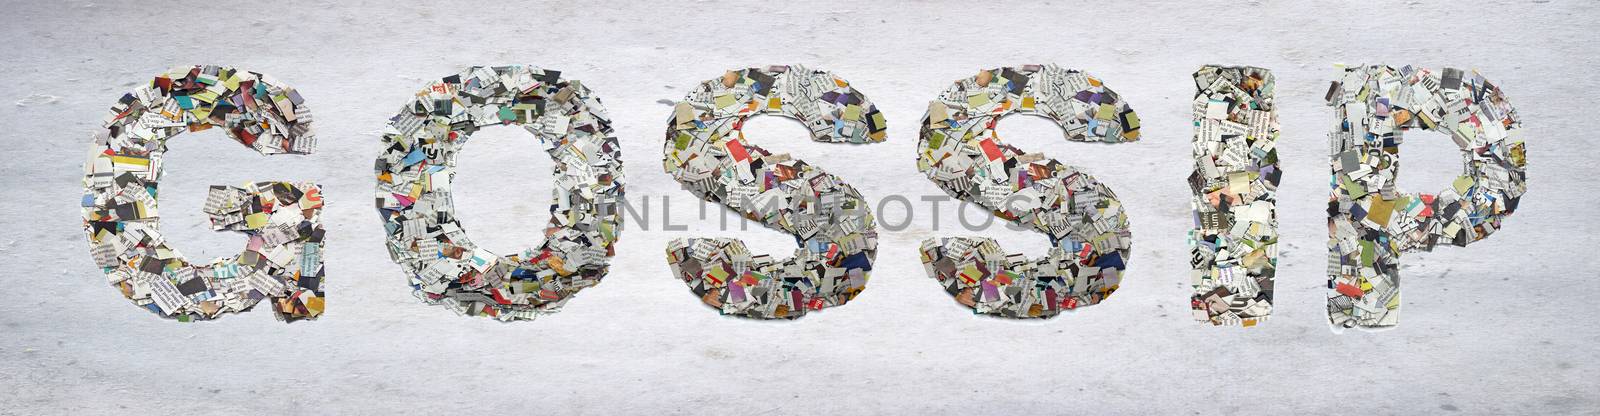 the word  GOSSIP made from newspaper confetti on old paper  by davincidig